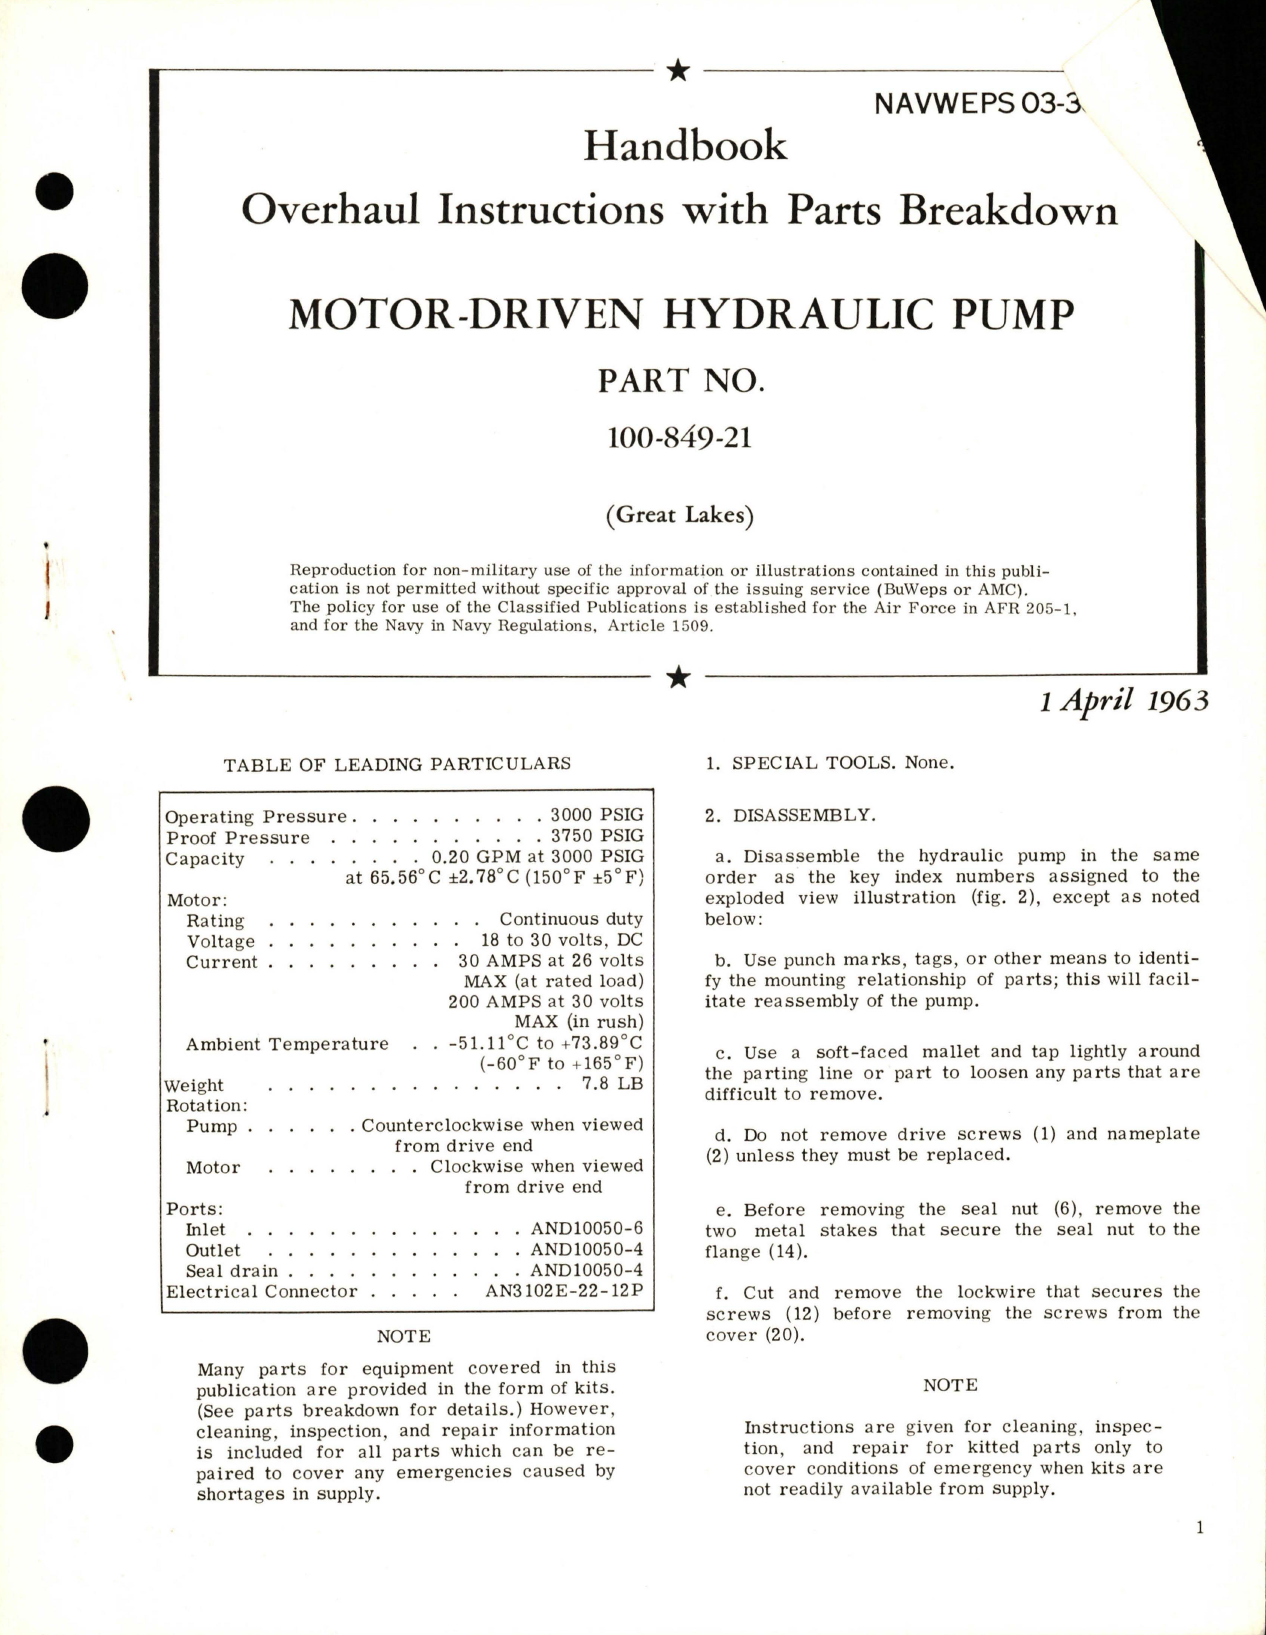 Sample page 1 from AirCorps Library document: Overhaul Instructions with Parts Breakdown for Motor-Driven Hydraulic Pump - Part 100-849-21